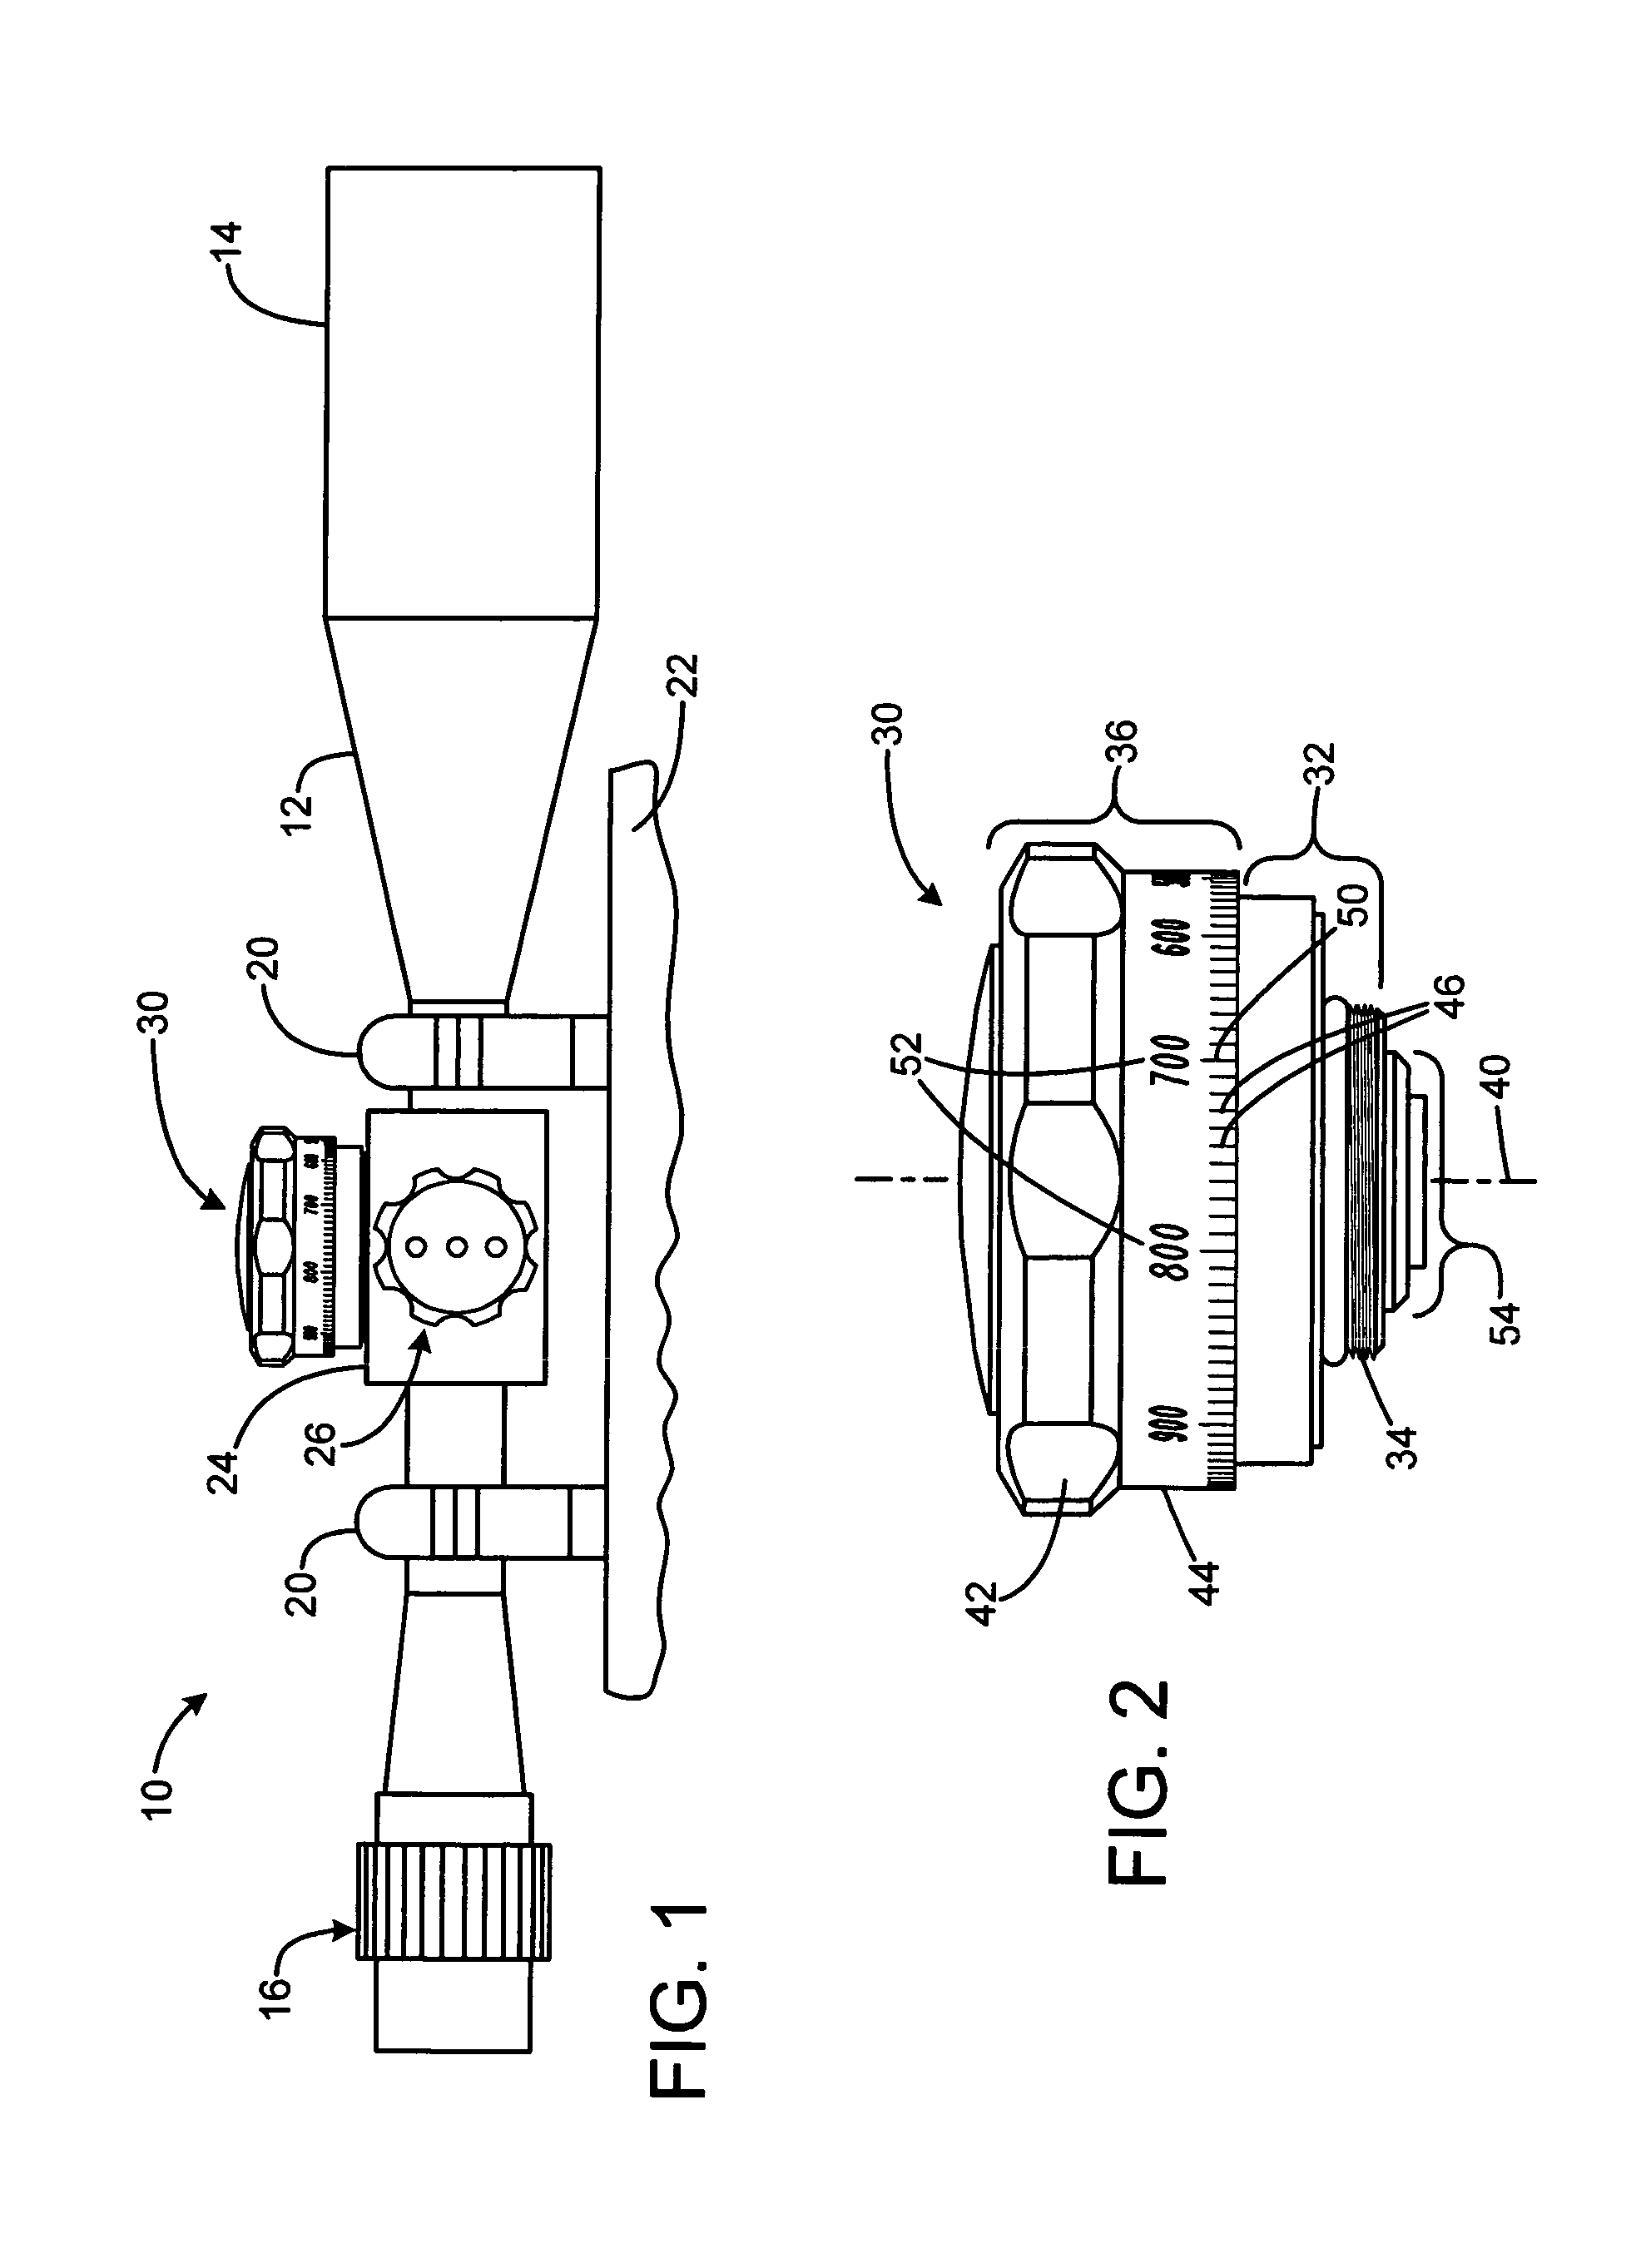 Rifle scope with adjustment knob having multiple detent forces